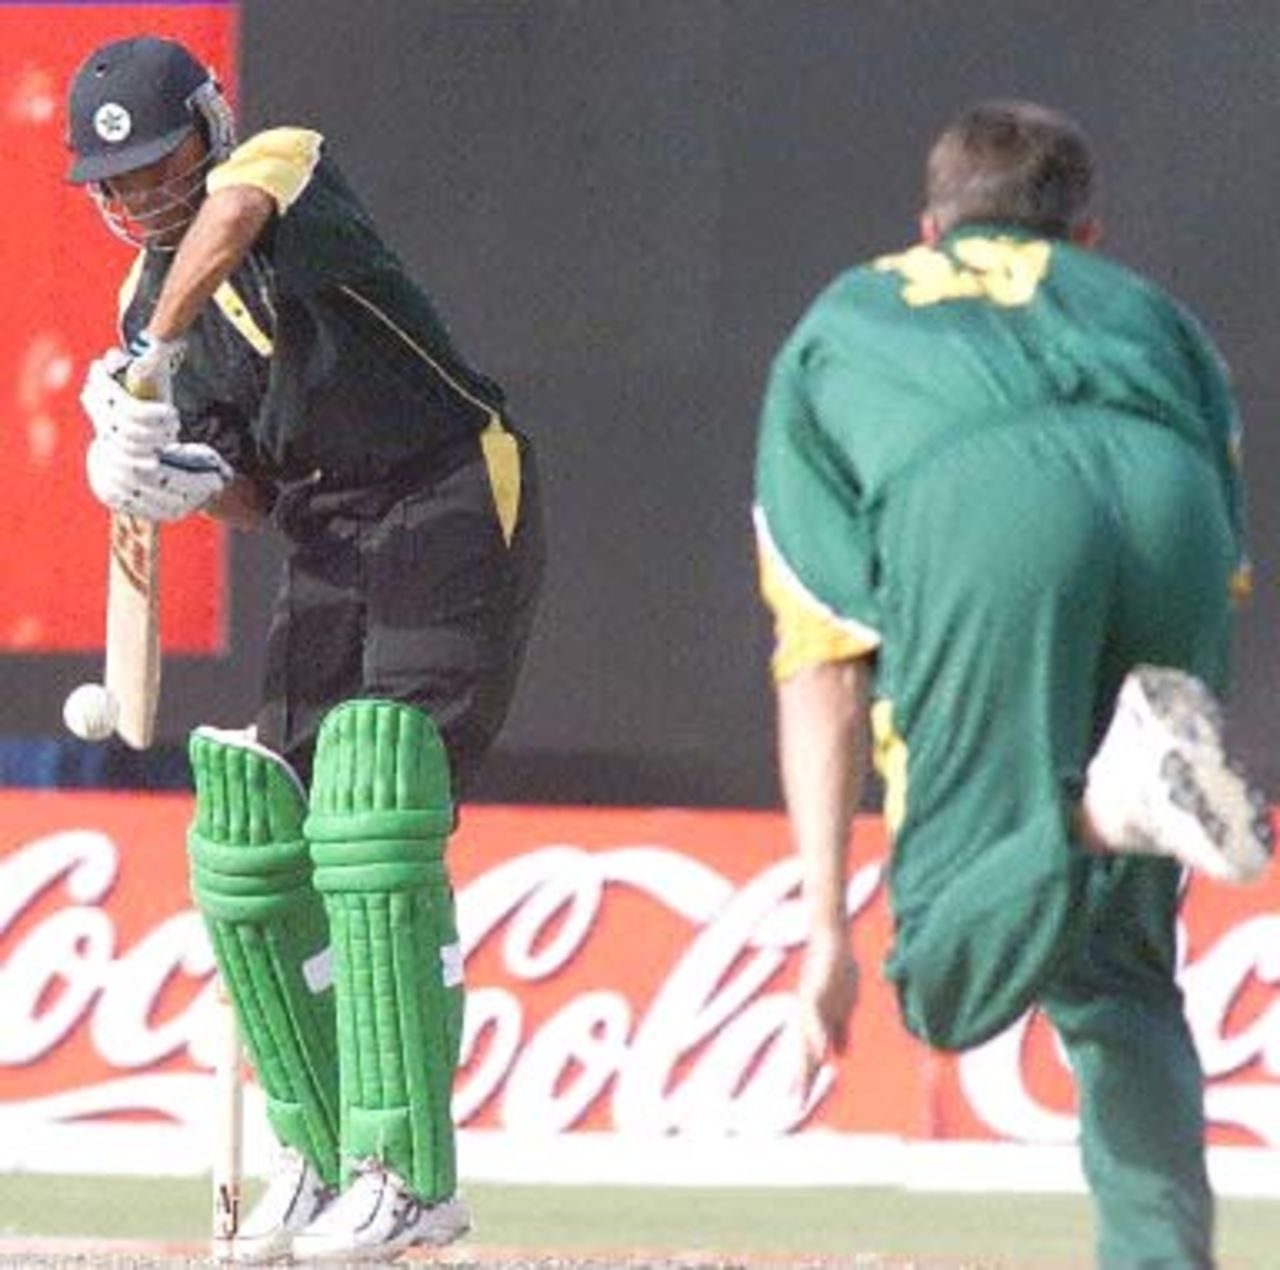 Pakistani batsman Waqar Younis in action against South African bowler Steve Elworthy  during the Champions Cup international at the Sharjah cricket stadium 24 March 2000.